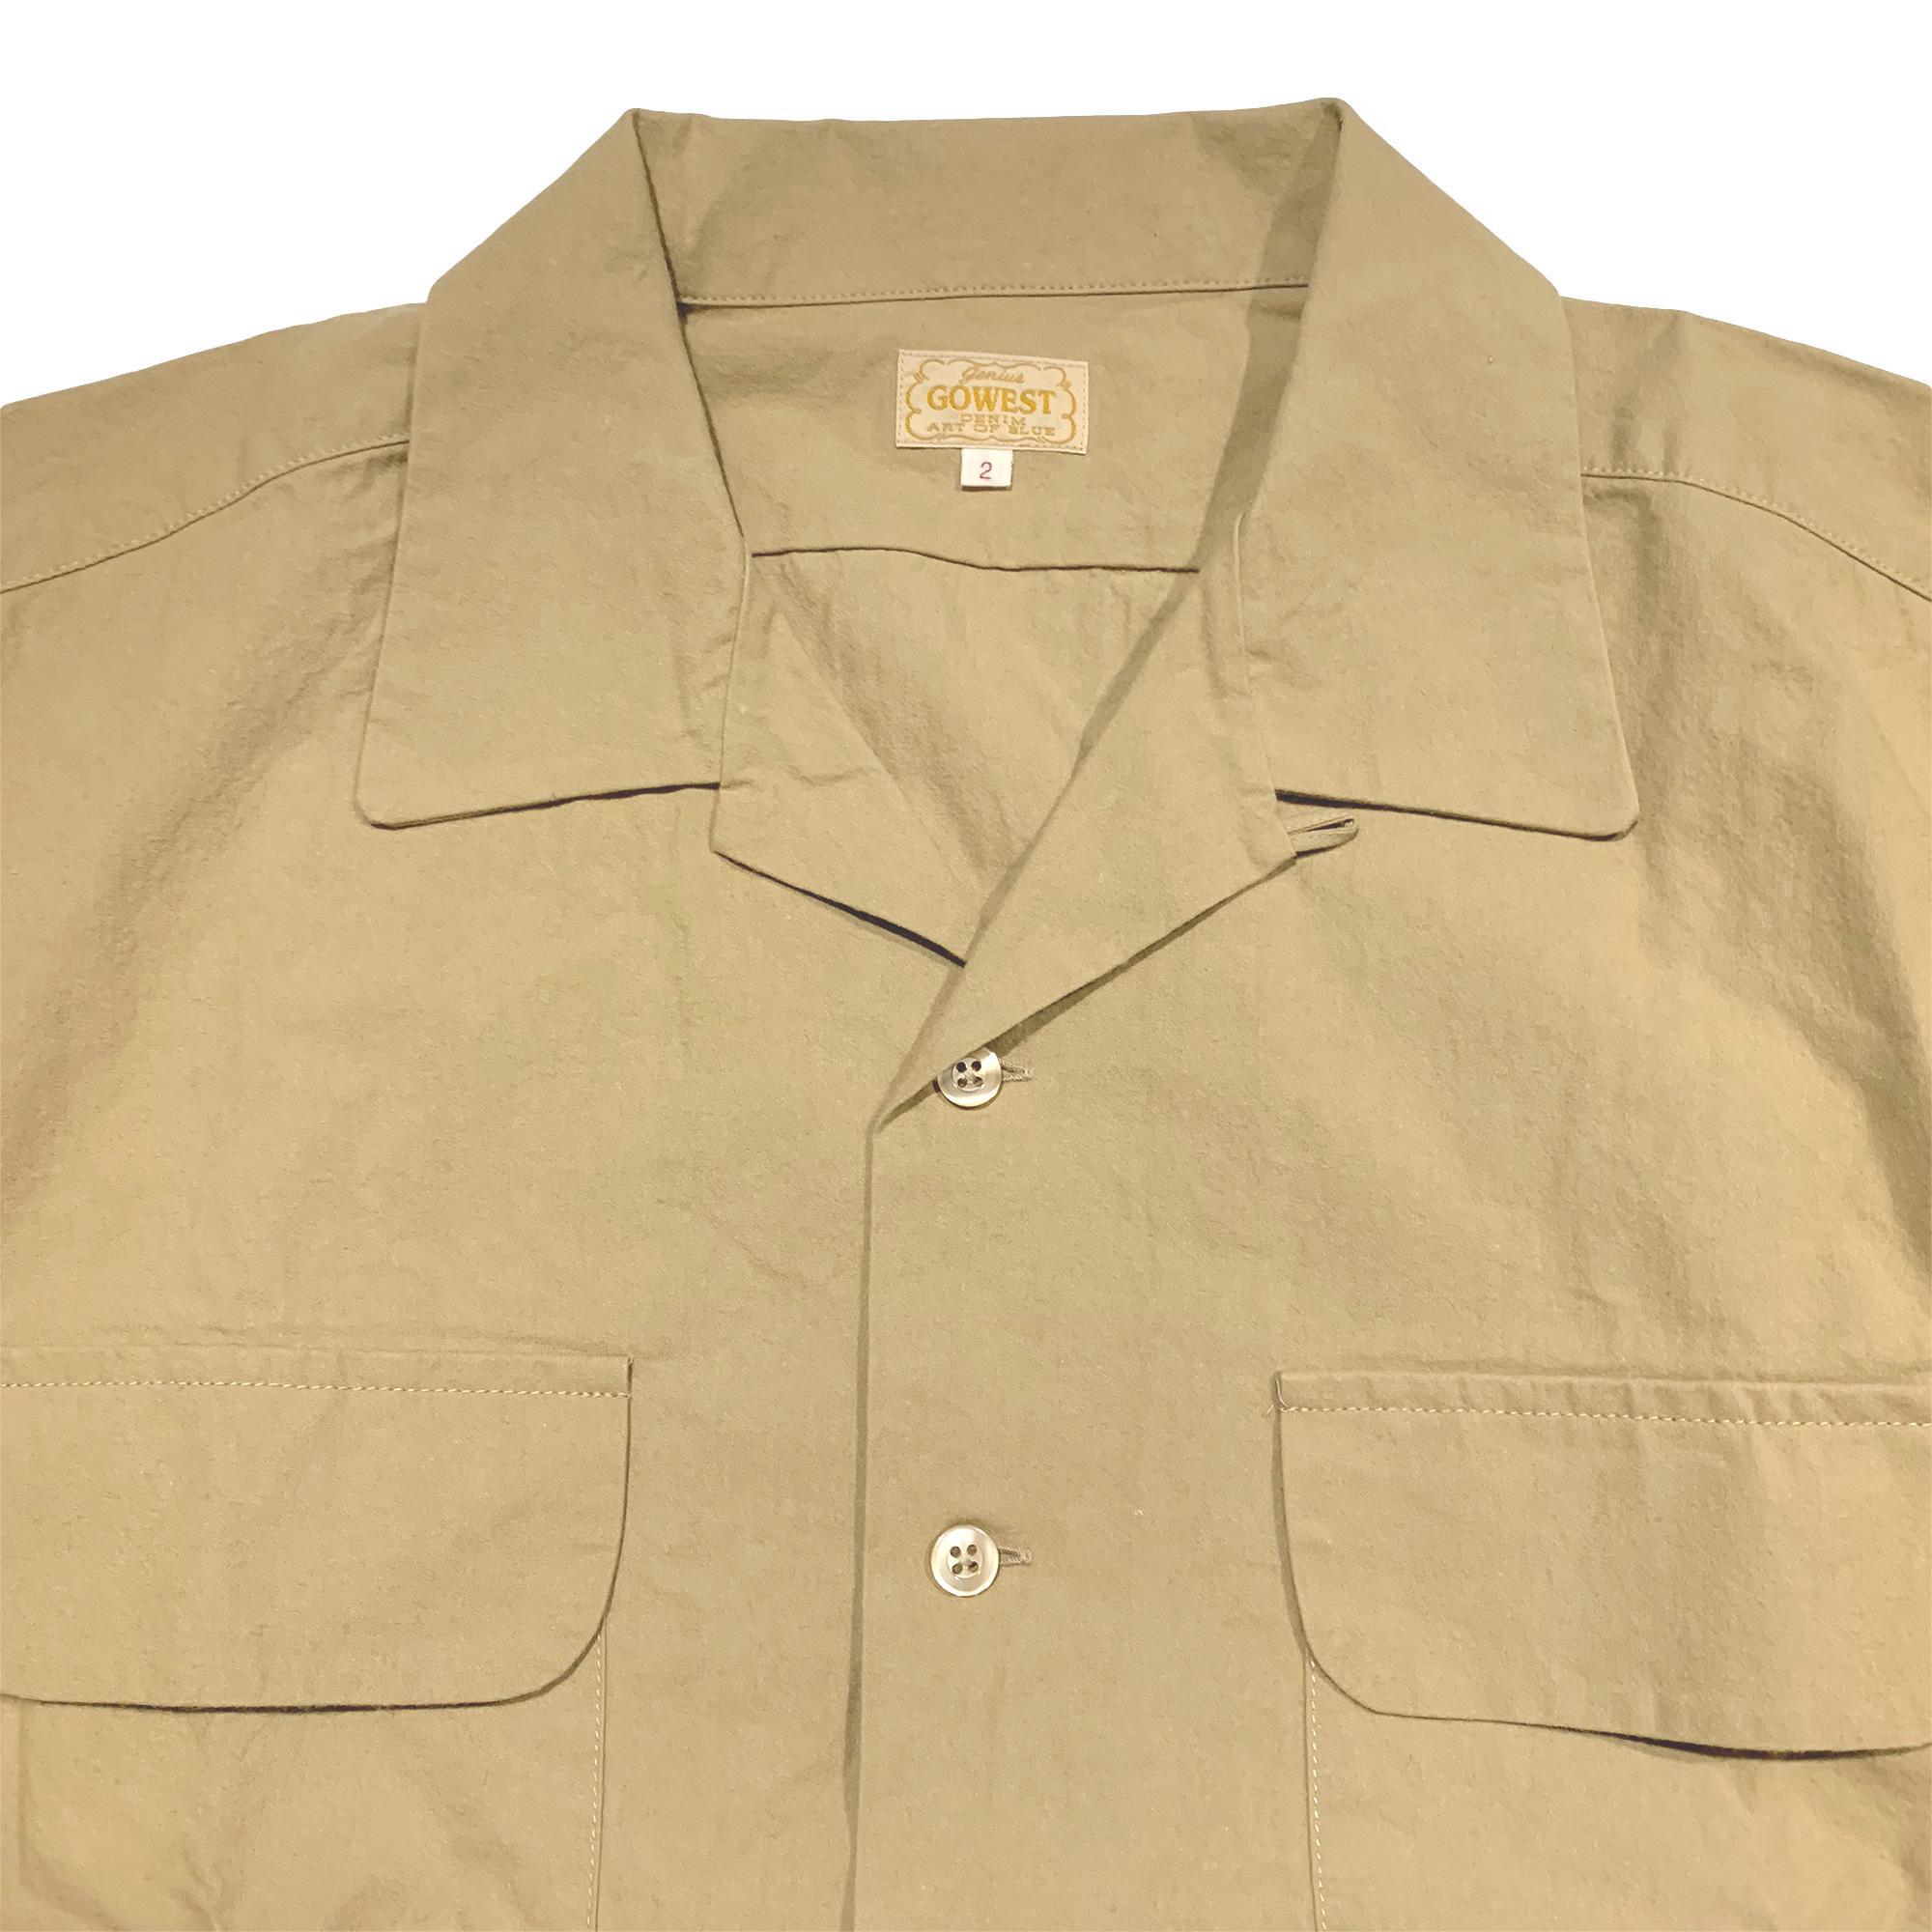 OUT OF BORDER SHIRTS／BAFU CLOTH -VINTAGE FINISHED